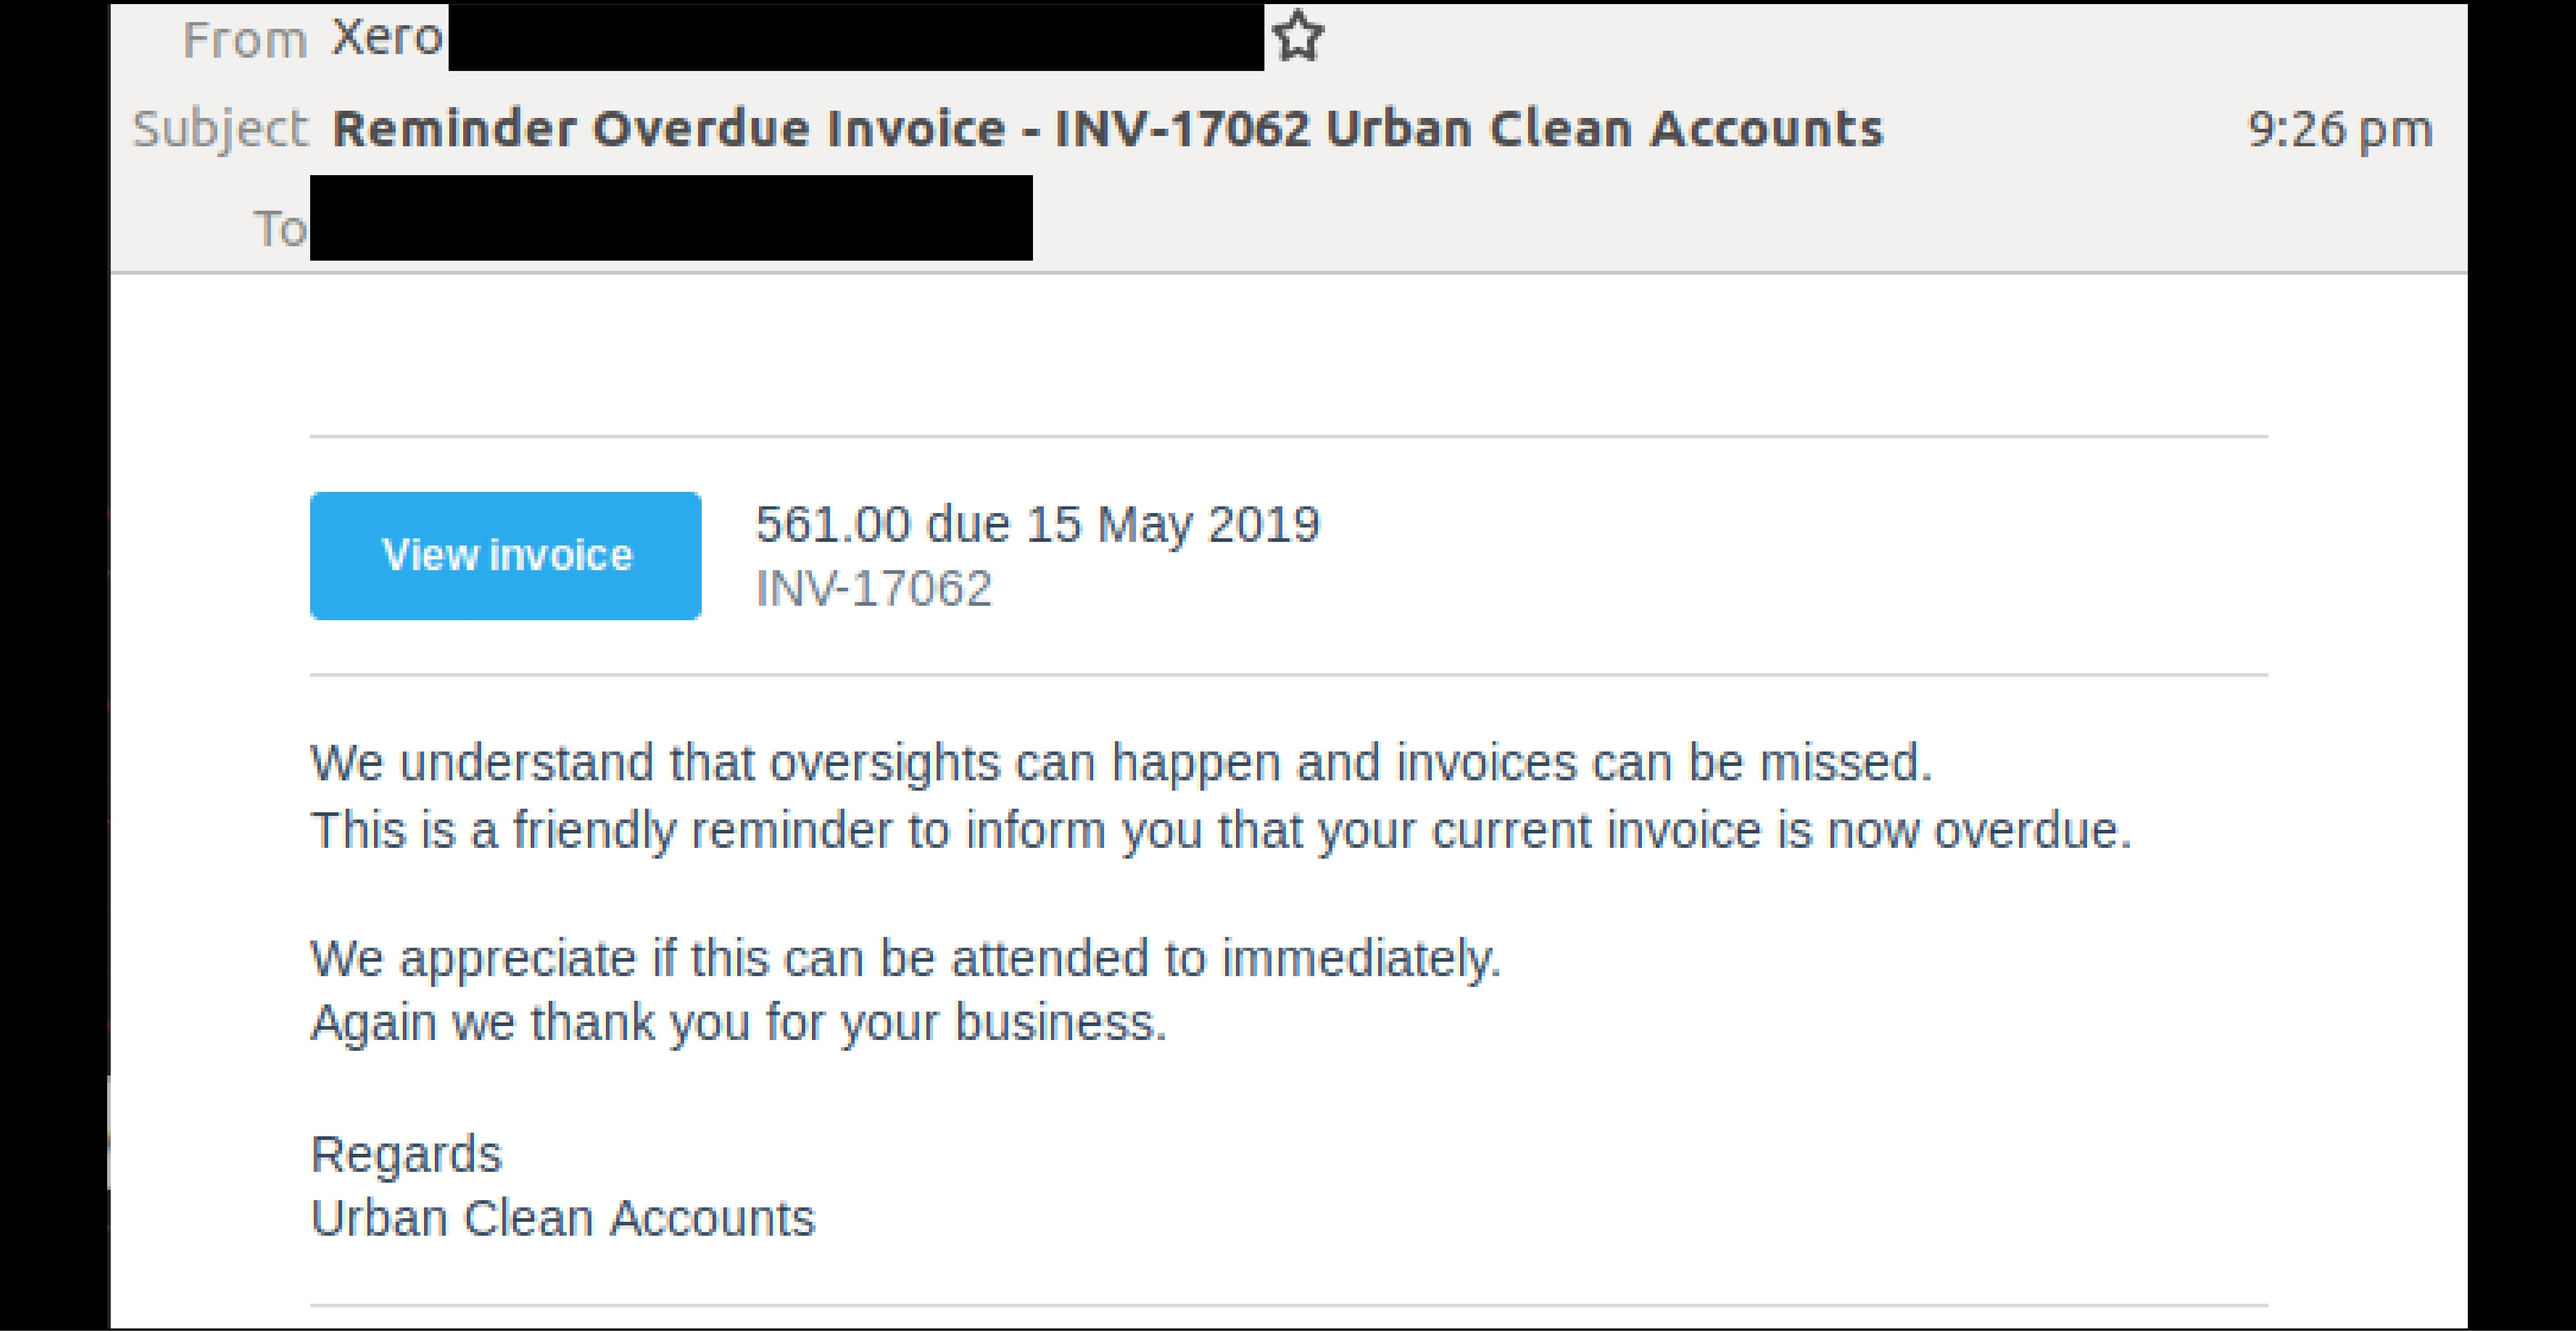 invoice email scam spoofing xero attacks inboxes again overdue invoice reminder email